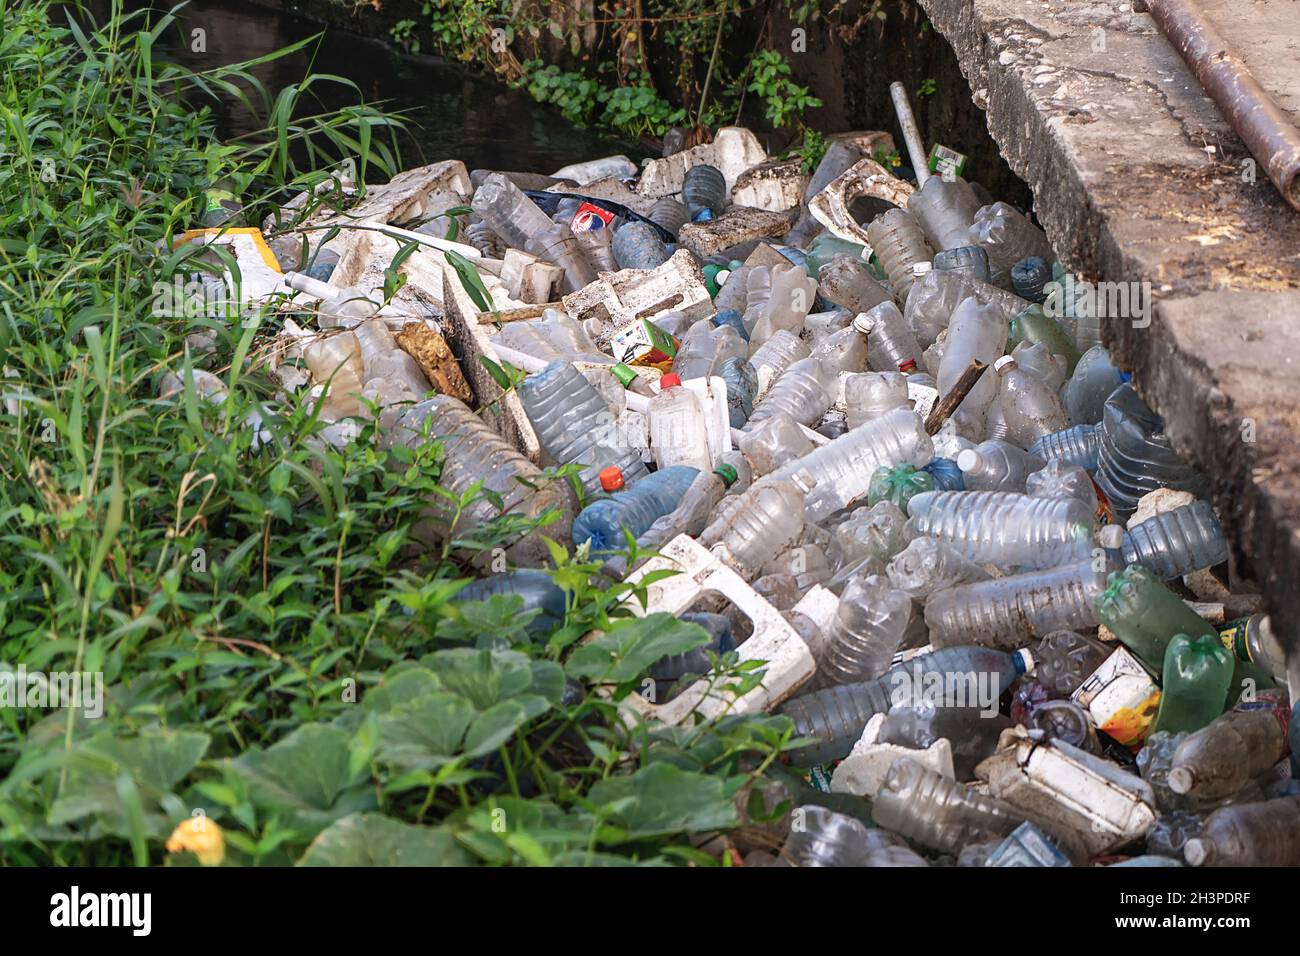 Plastic debris accumulated on the edge of a river Stock Photo